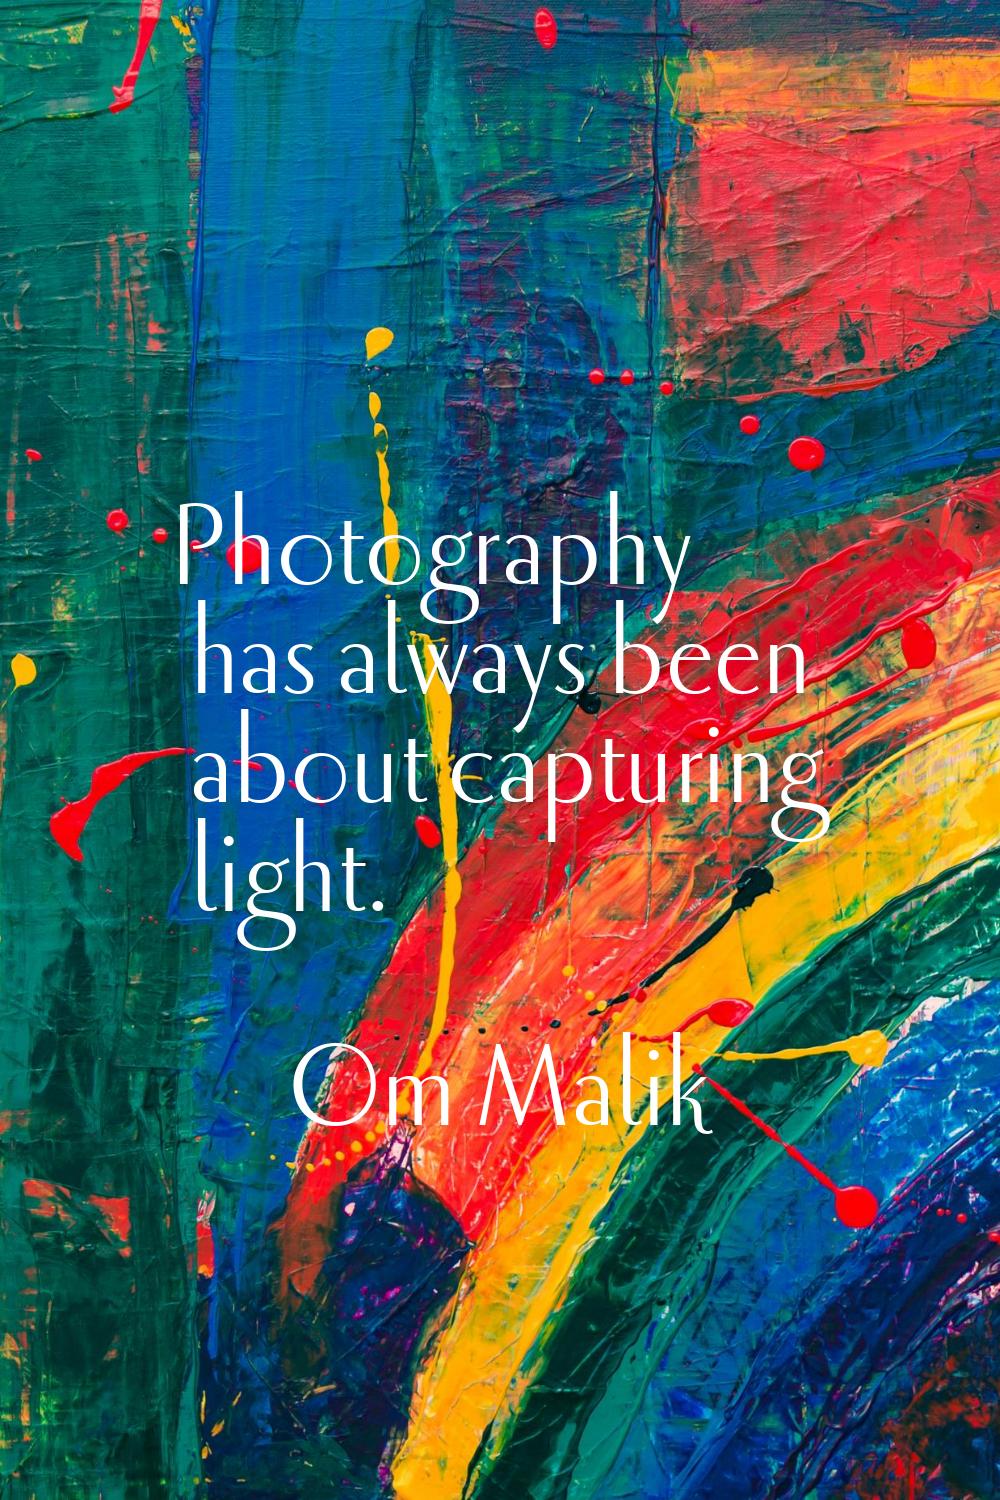 Photography has always been about capturing light.